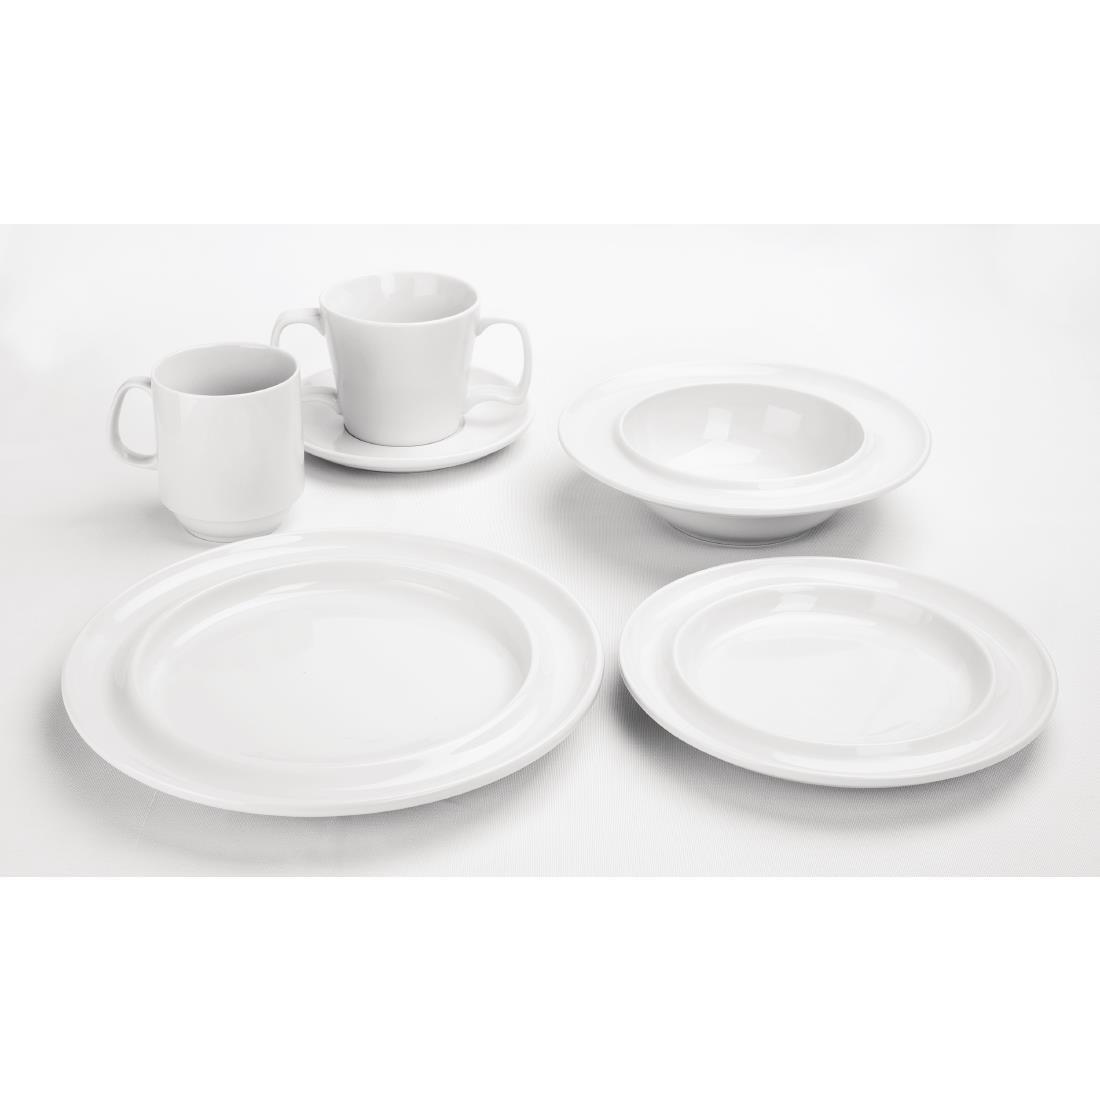 Olympia Heritage Double Well Saucers 163mm White (Pack of 6) - DW157  - 4